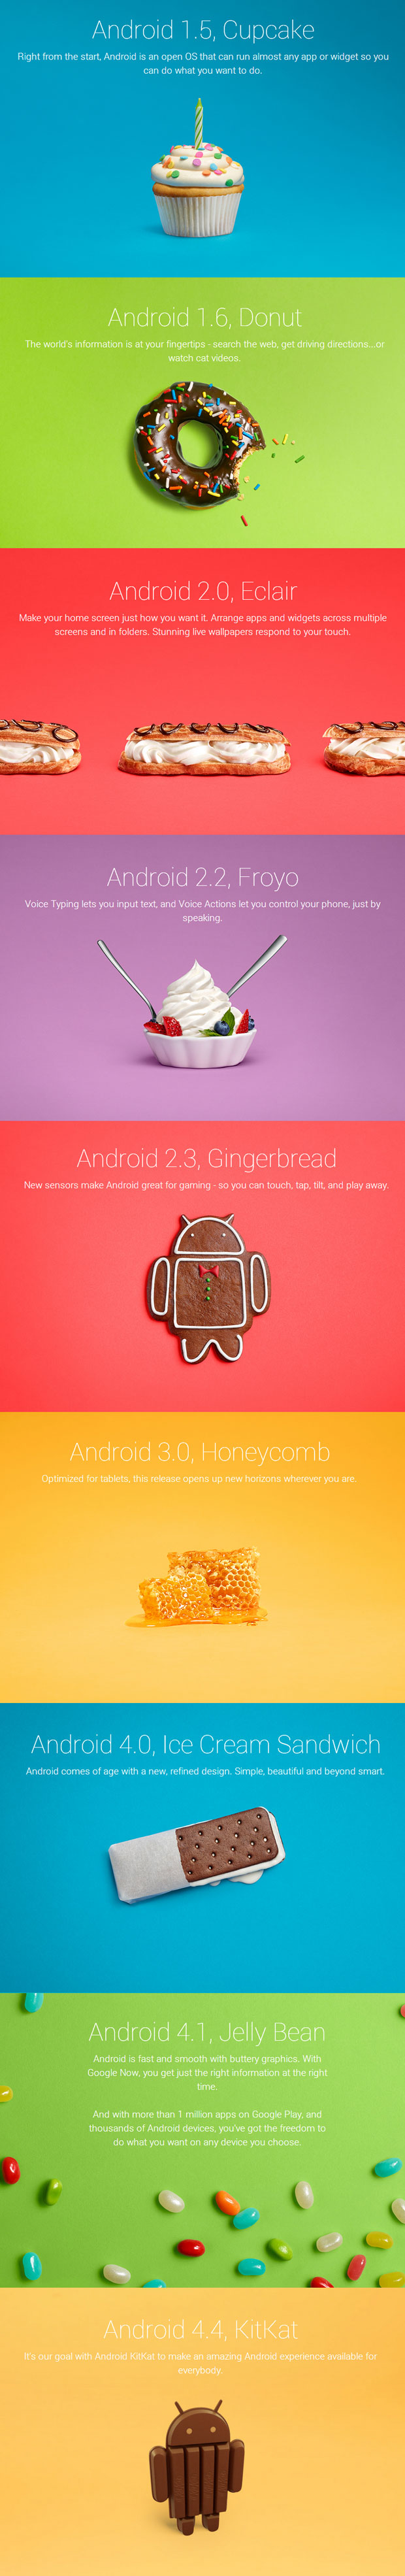 Android Versions to KitKat